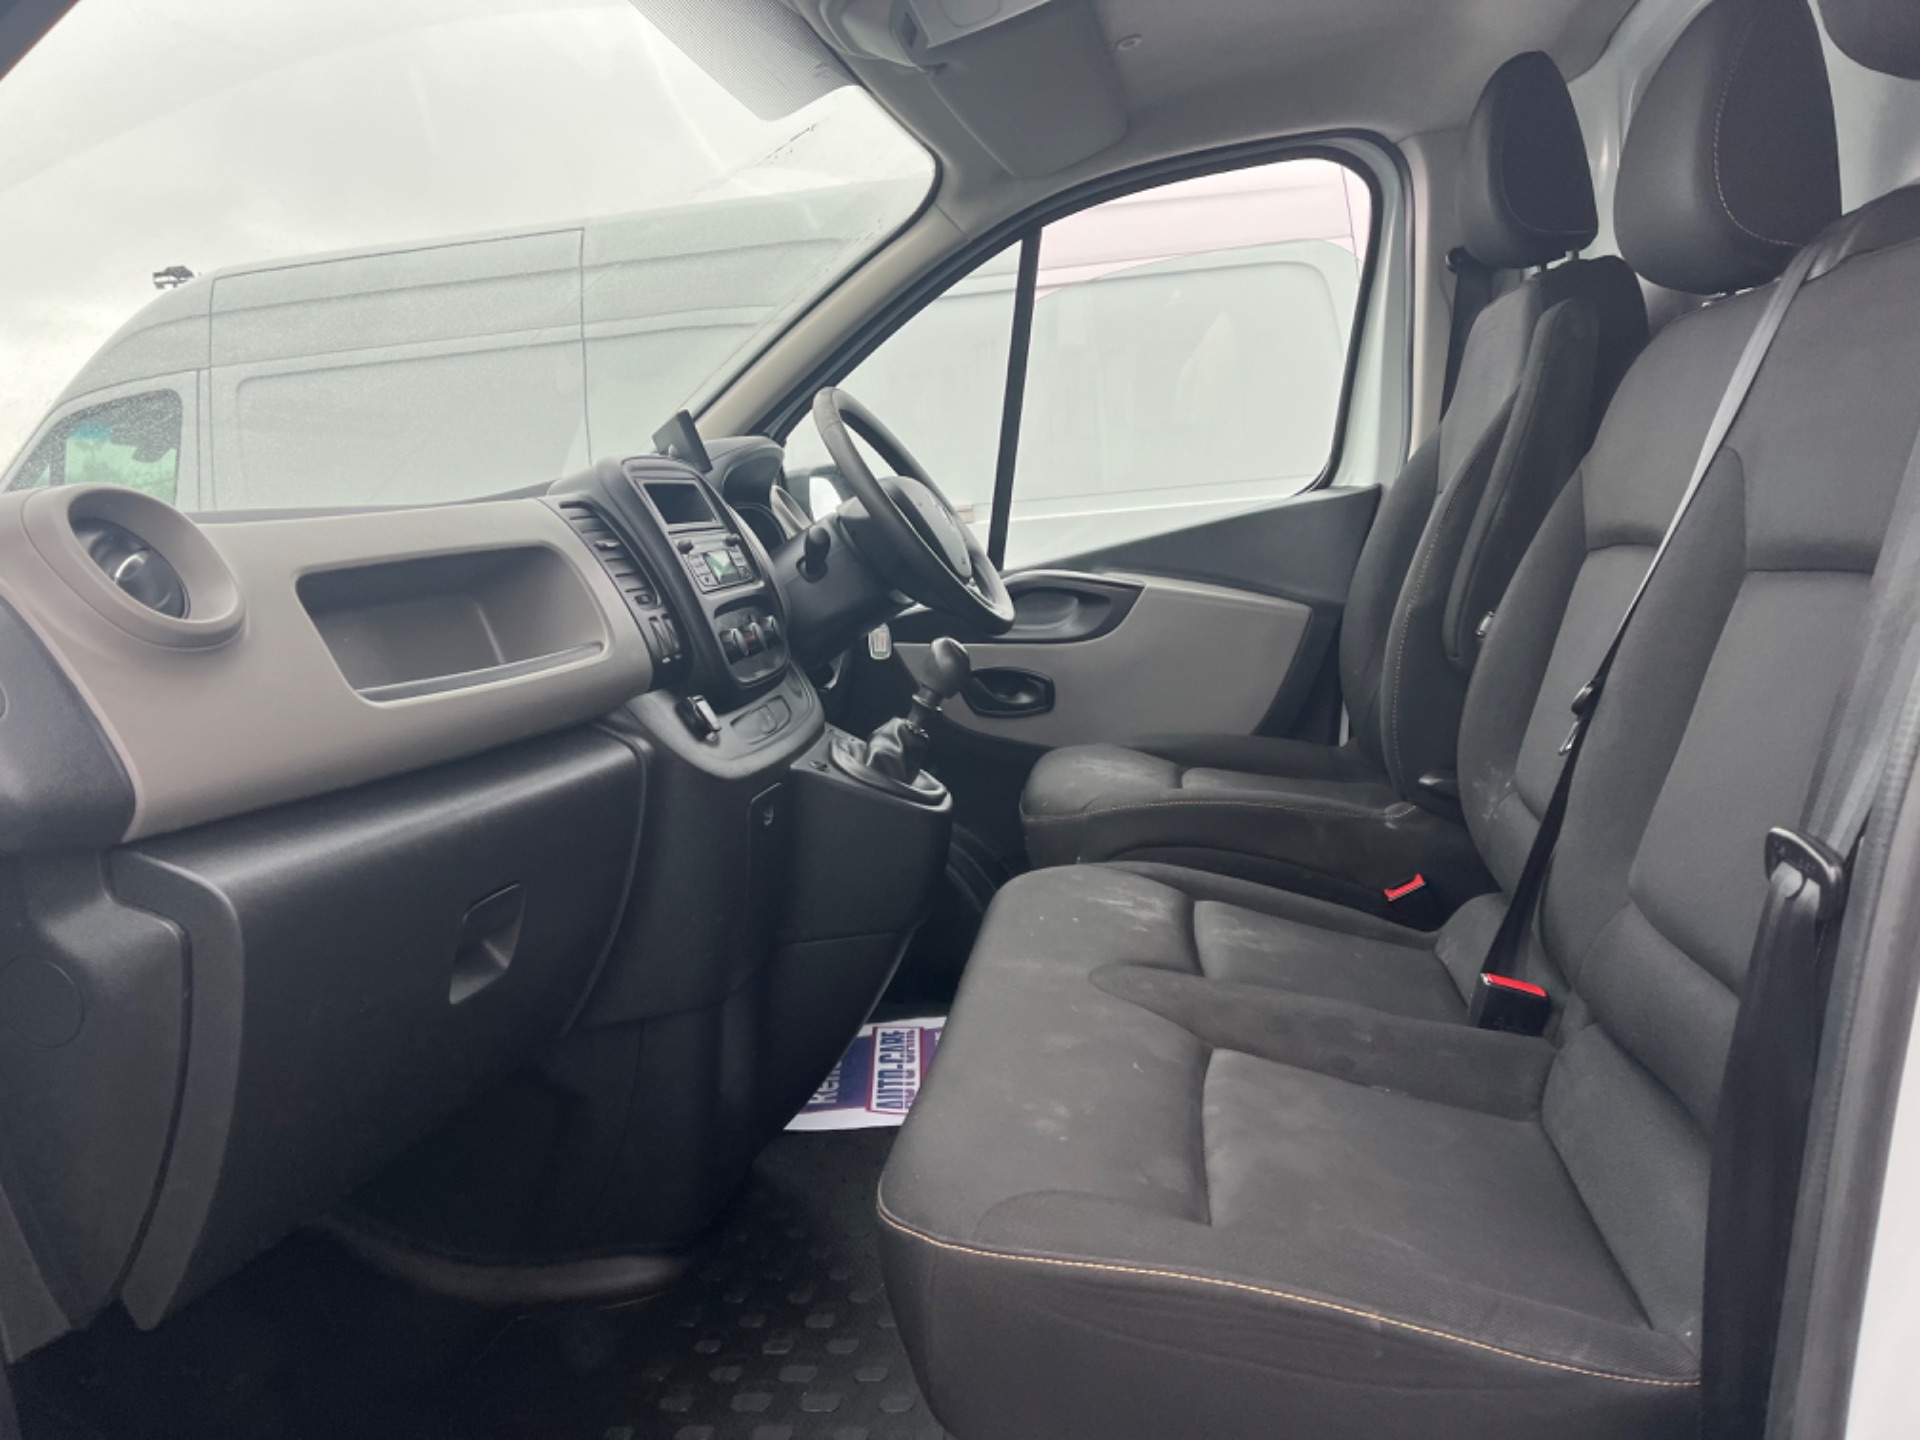 2018 Renault Trafic LL29 DCI 120 Business 3DR (181D13691) Image 8